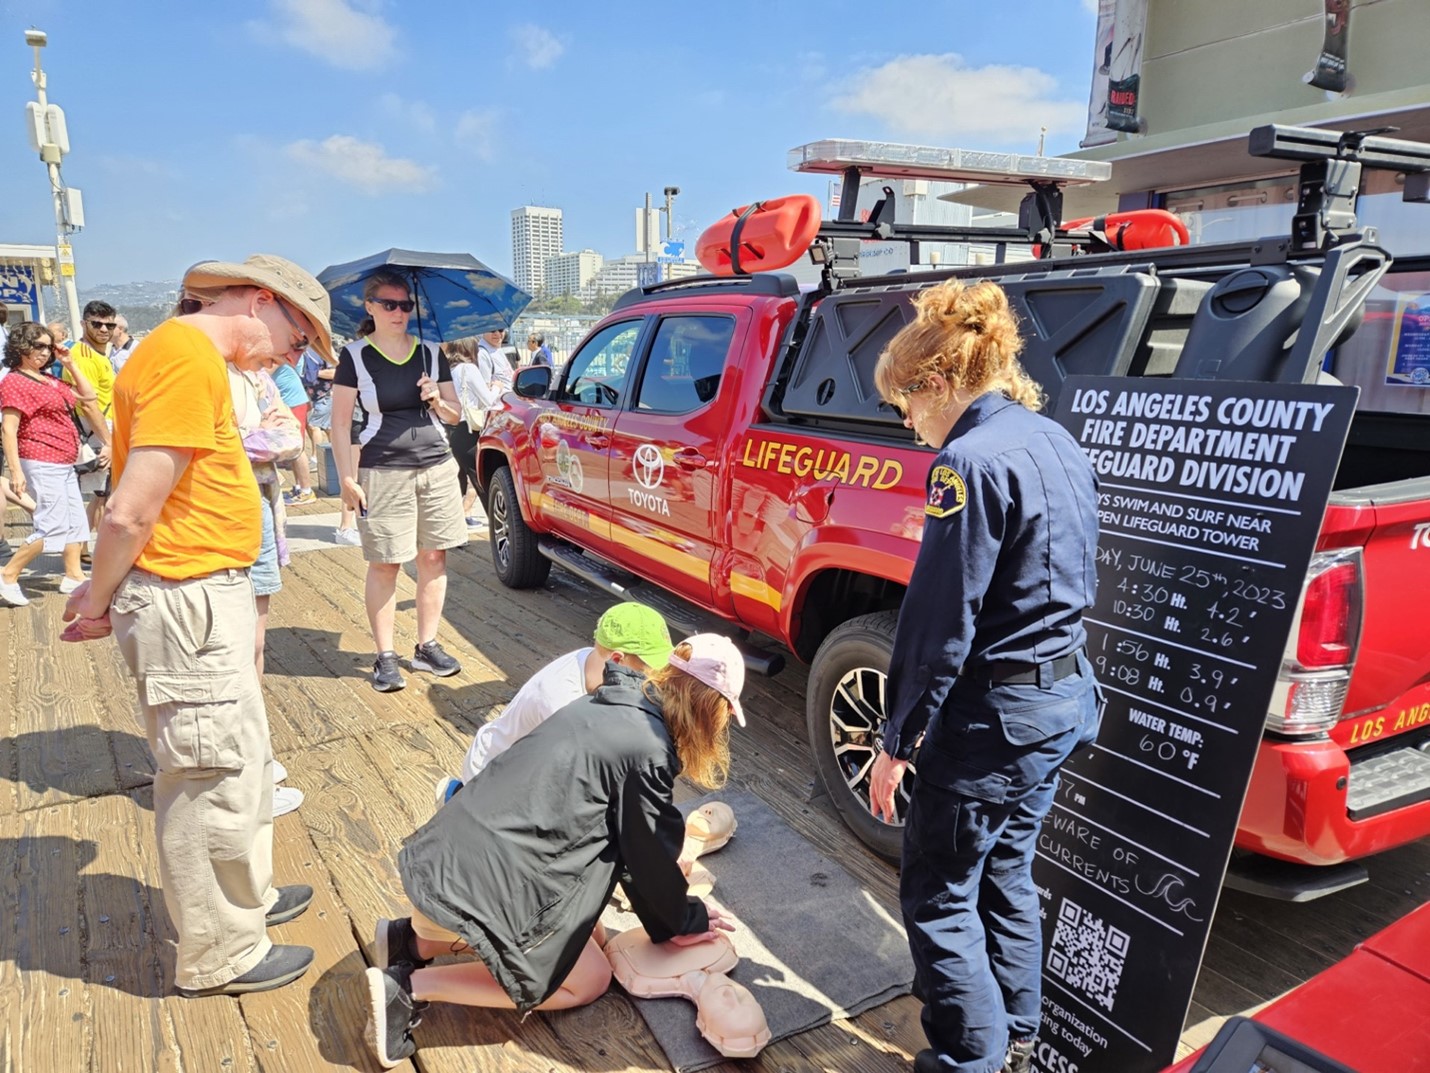 Lifeguard Division Teaches Hands-Only CPR at Pier 360 Festival